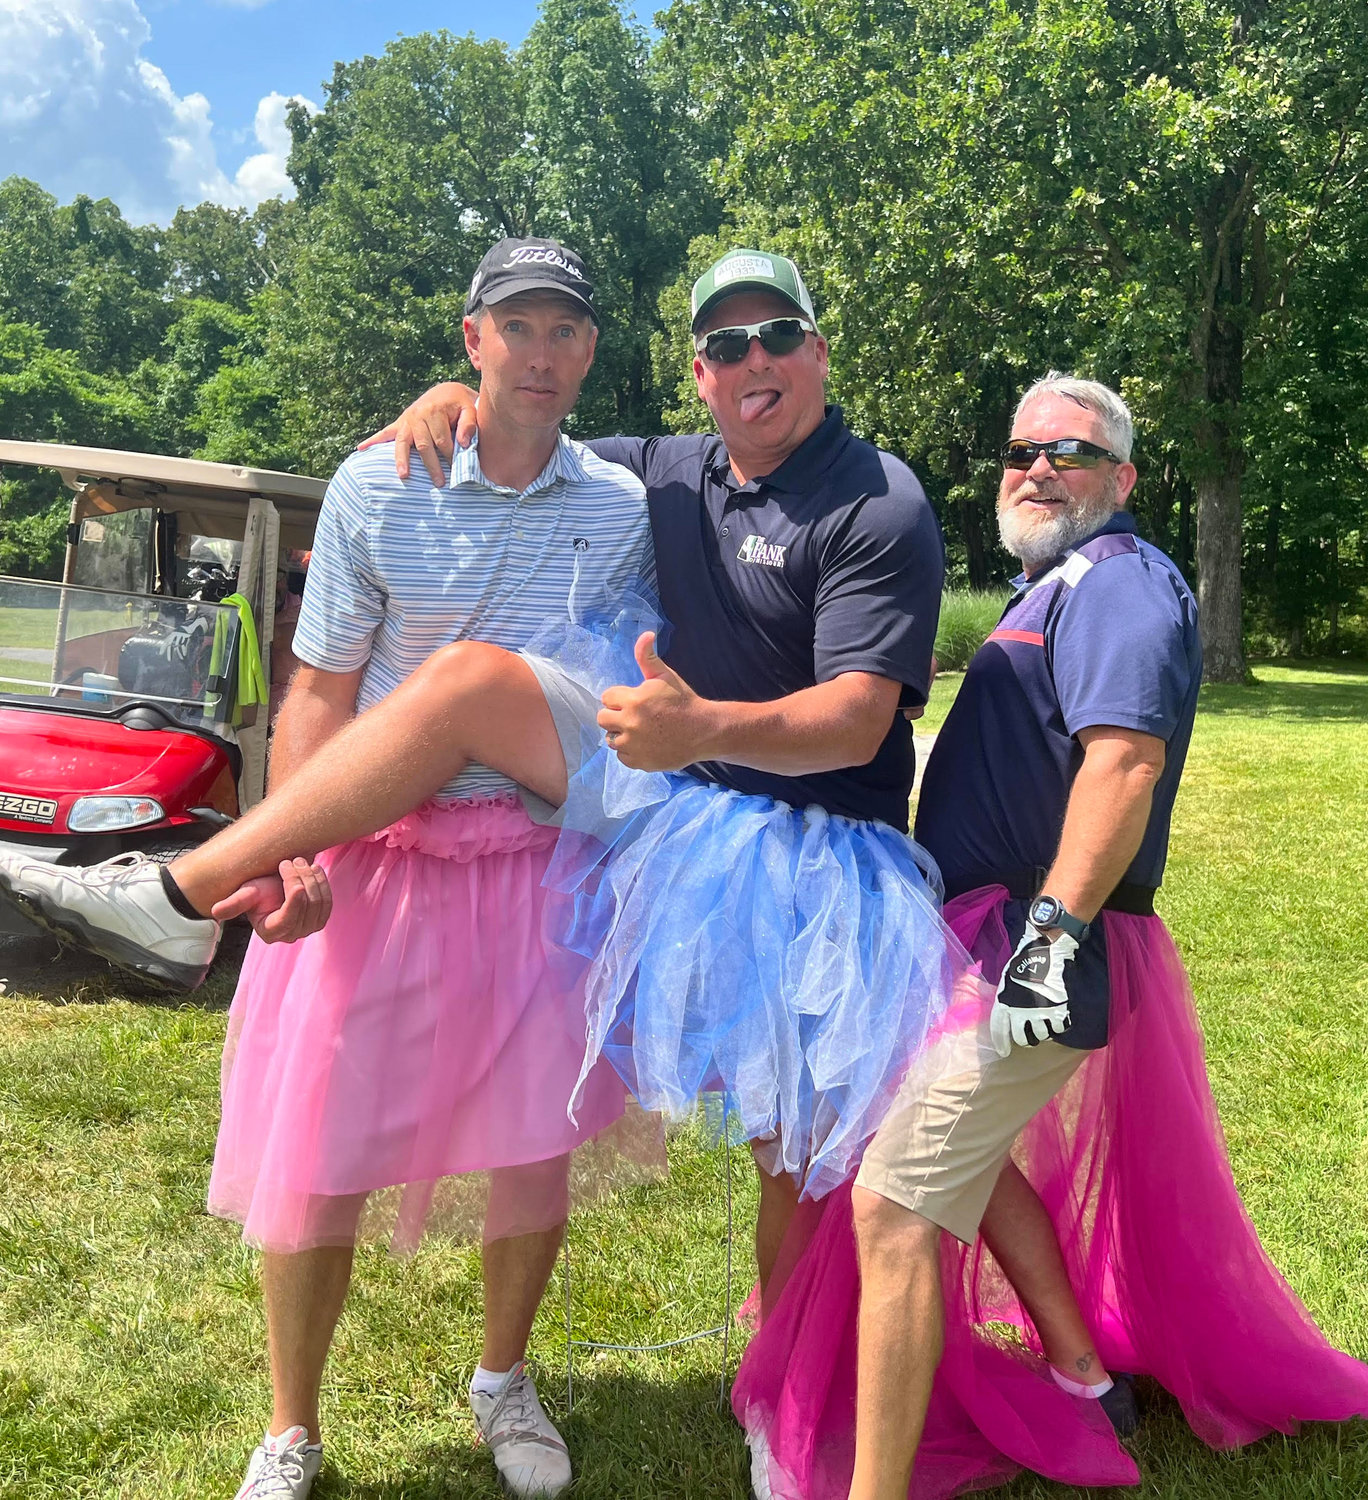 David Coutchie, Chan Crooker and Mark Sammons were all smile and laughs while posing in their skirts.